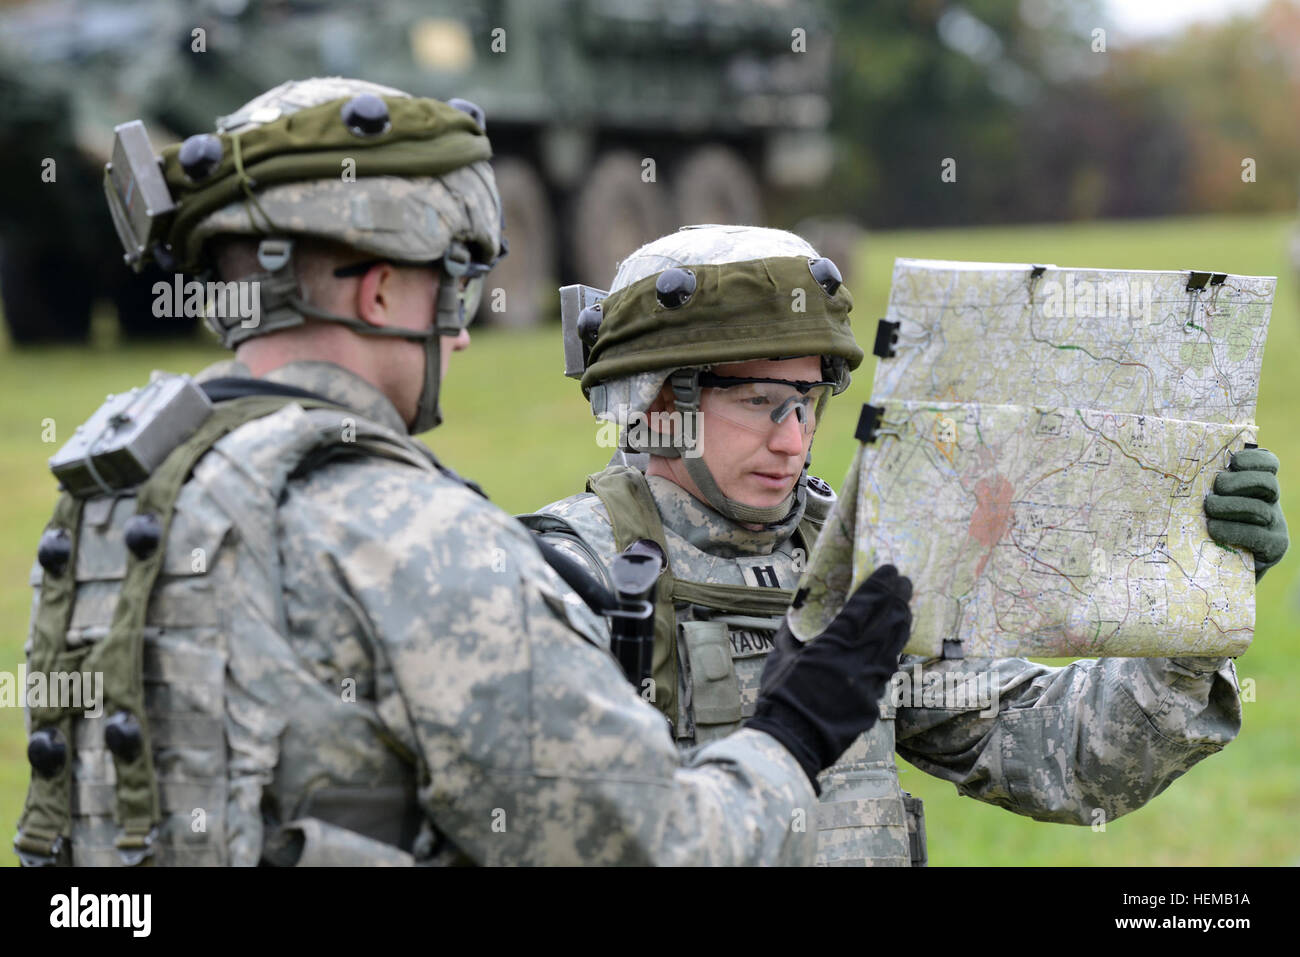 U.S. Army Europe Capt. Ryan Yaun, assigned to 2nd Cavalry Regiment, also known as 2CR, studies a map near Grafenwoehr, Germany, during Saber Junction 2012, Oct. 15. The U.S. Army Europe's exercise Saber Junction trains the 2CR and 1800 multinational partners from 18 nations ensuring multinational interoperability and an agile, ready coalition force.  (U.S. Army Europe photo by Visual Information Specialist Markus Rauchenberger/released) Saber Junction 2012 121015-A-BS310-013 Stock Photo